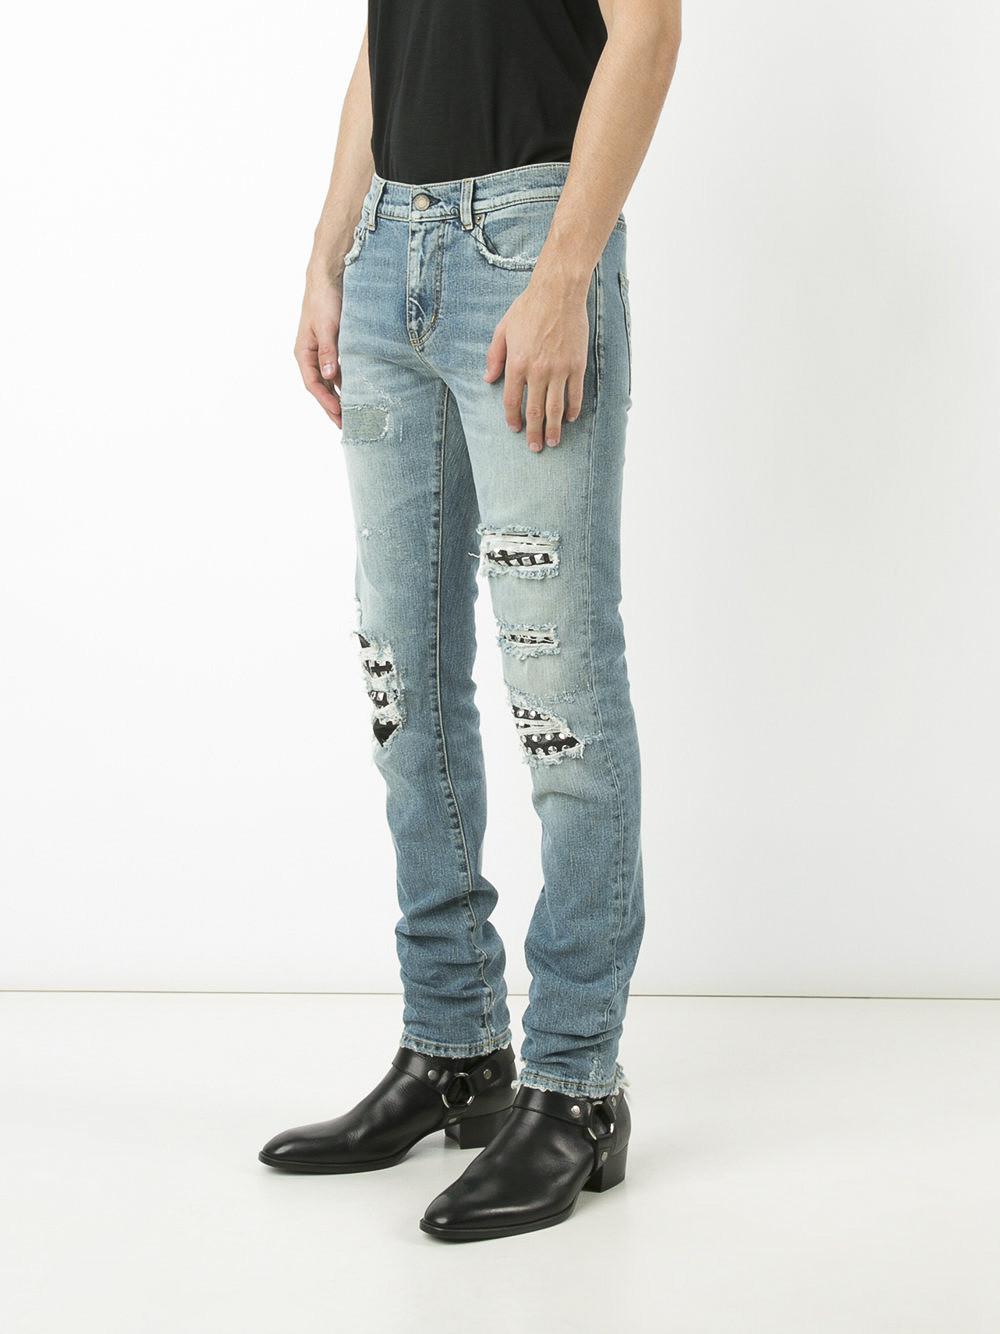 Lyst - Saint Laurent Studded Distressed Jeans in Blue for Men